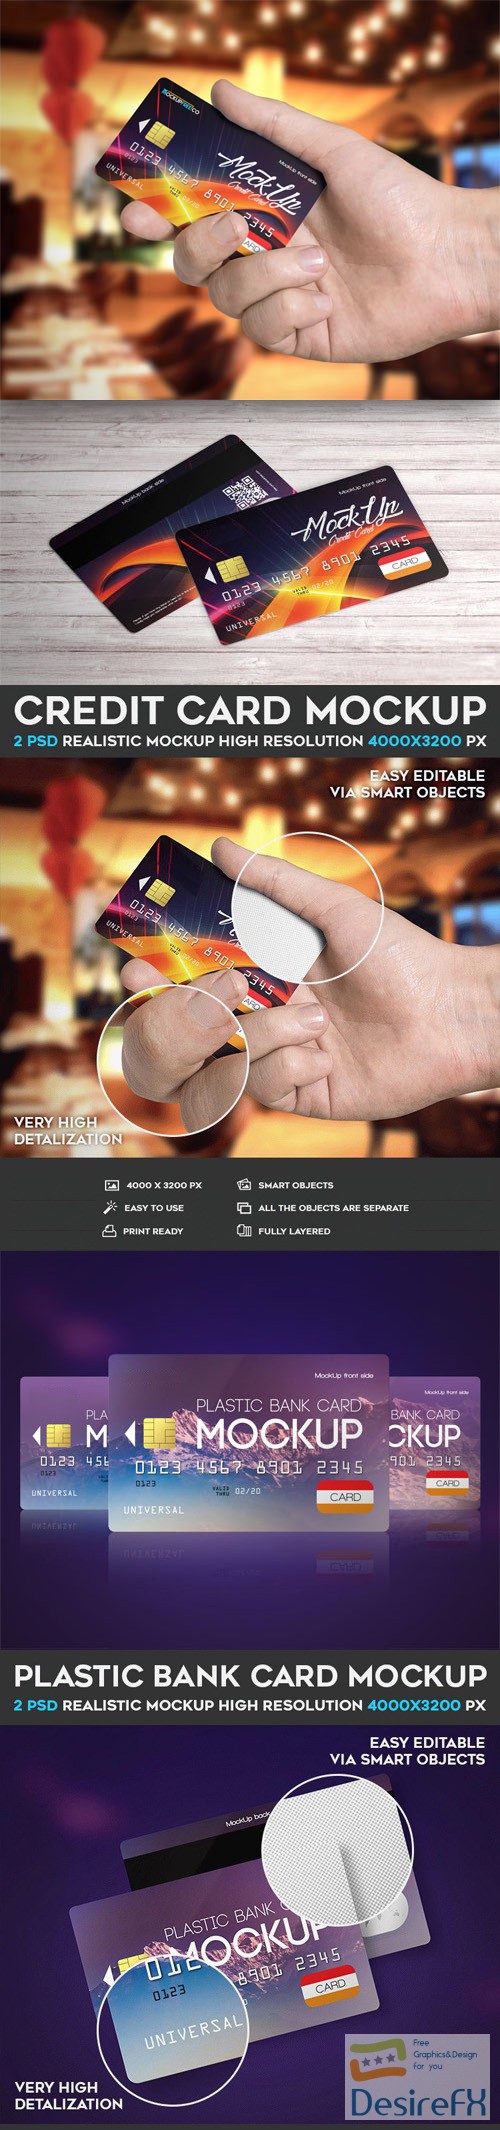 Credit Card - 4 PSD Mockups Collection